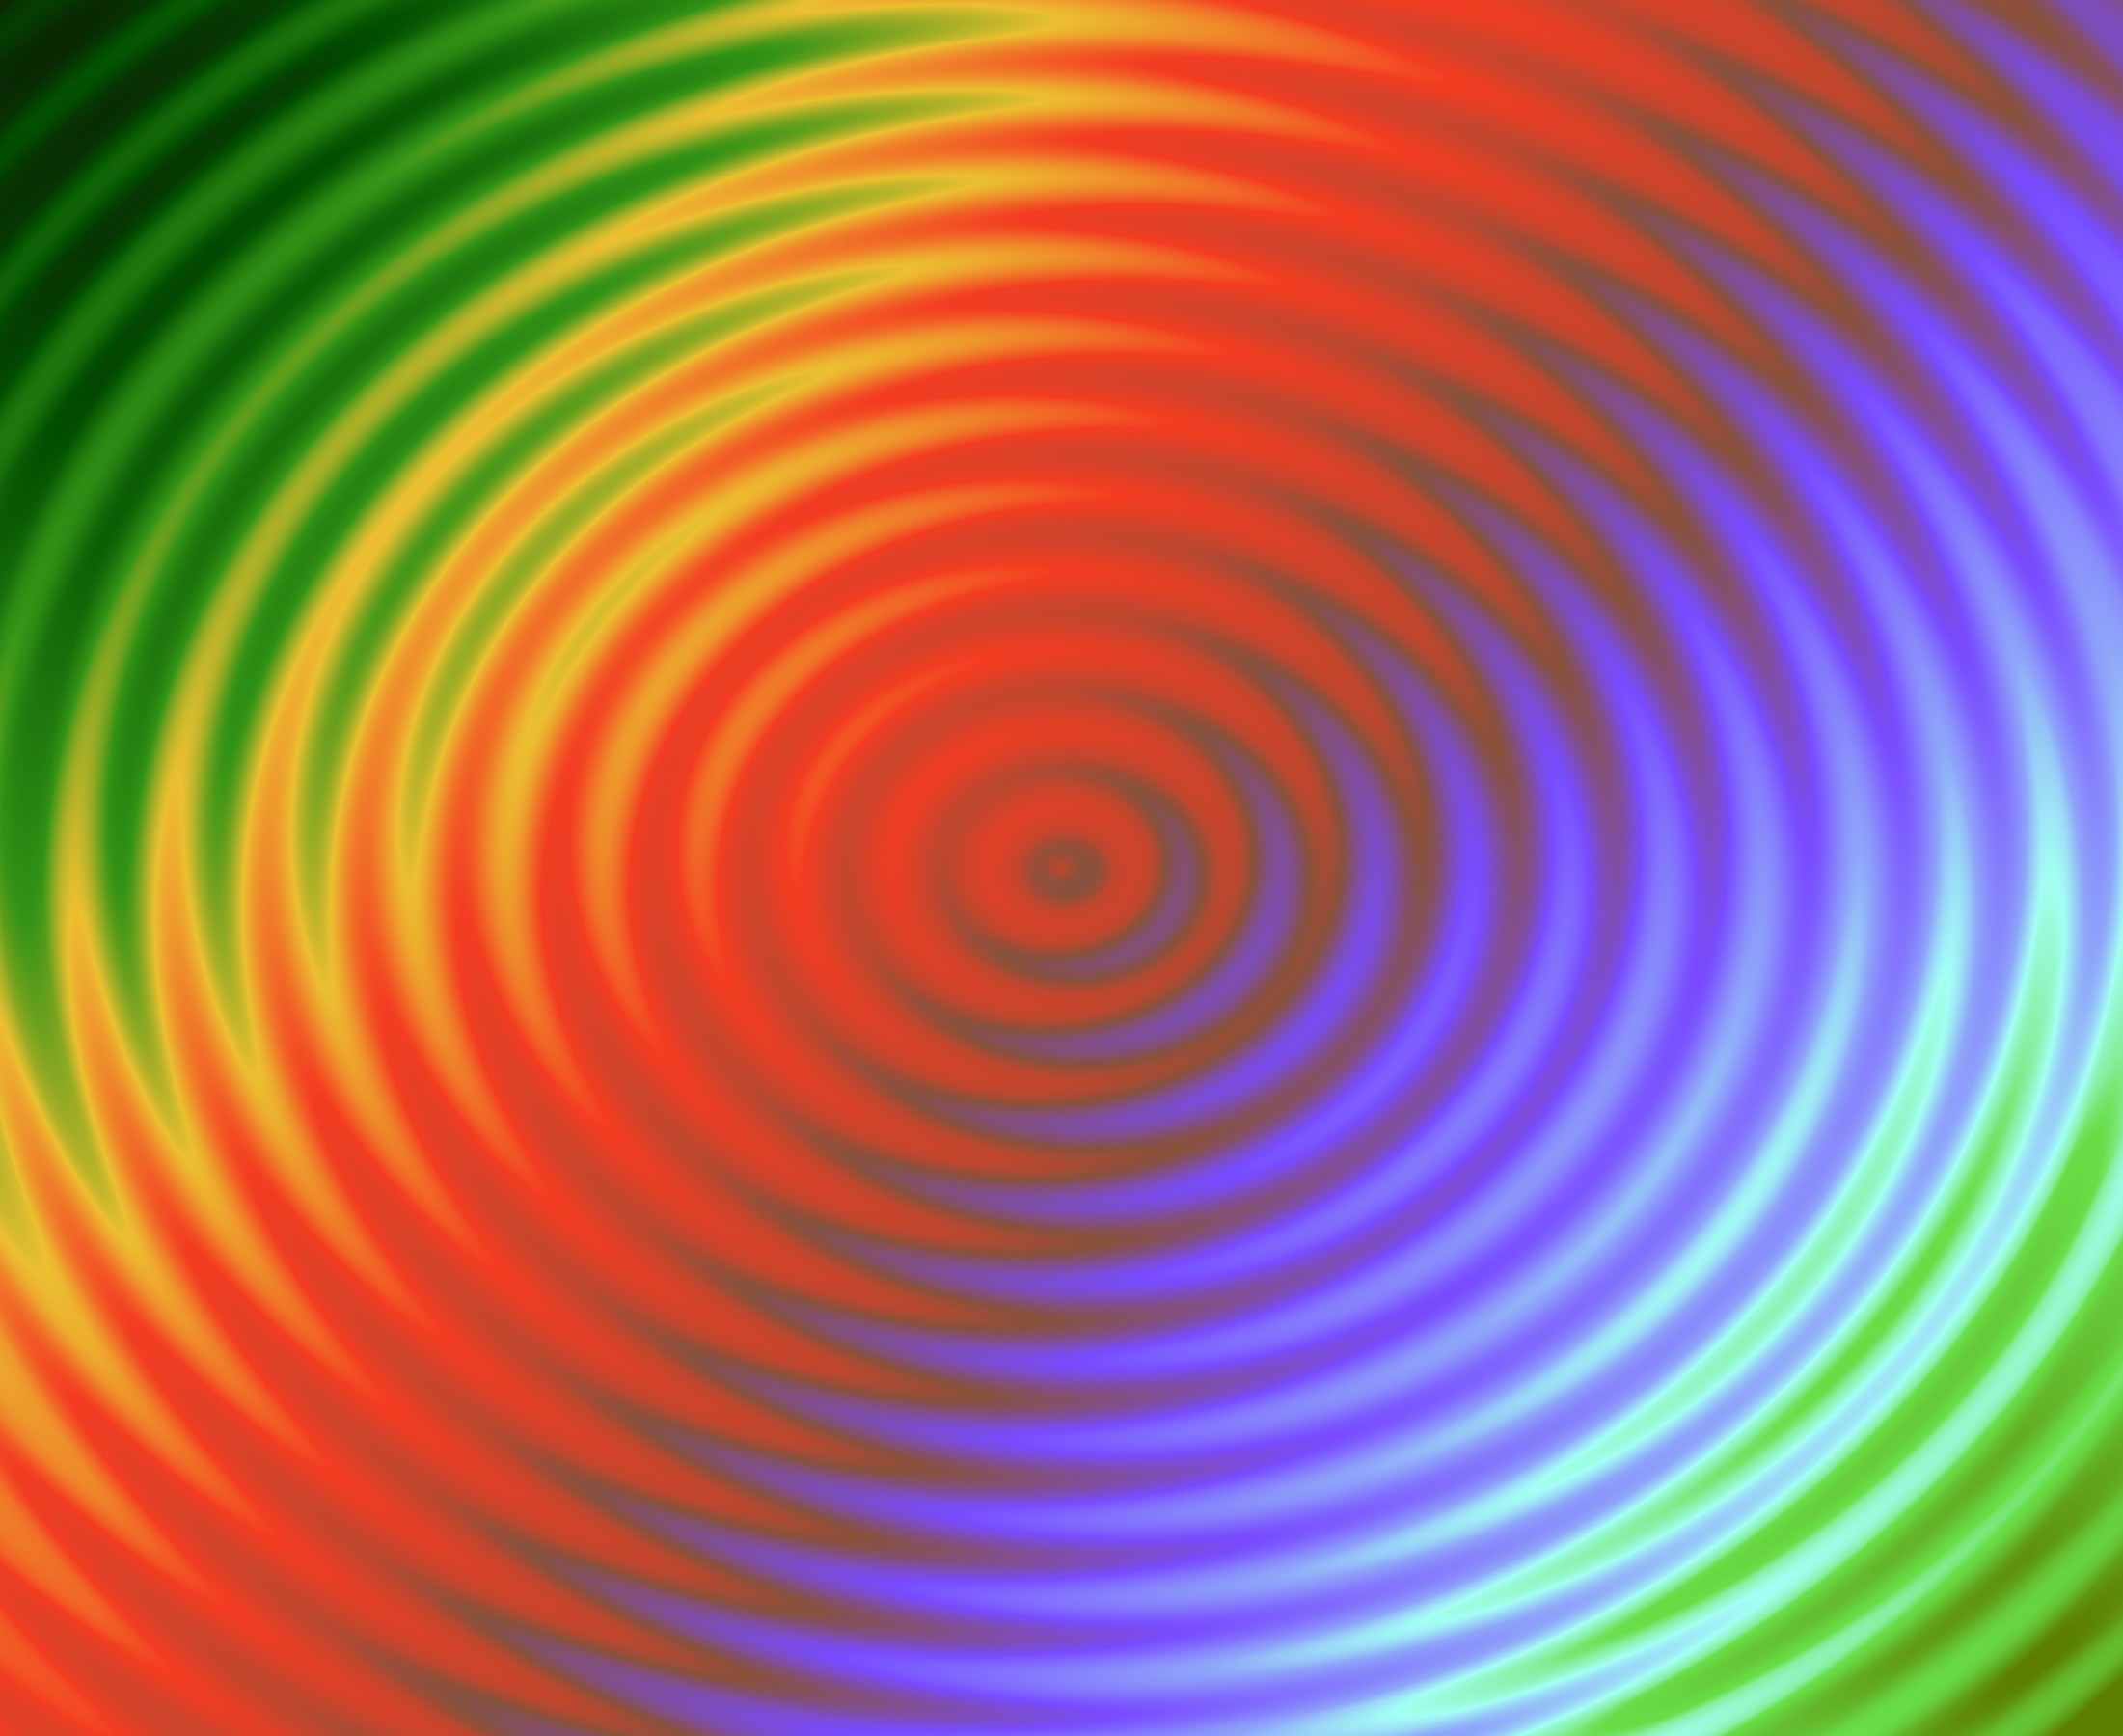 Wave atmosphere line green color circle background image rainbow rings shape repetition waves circles computer wallpaper